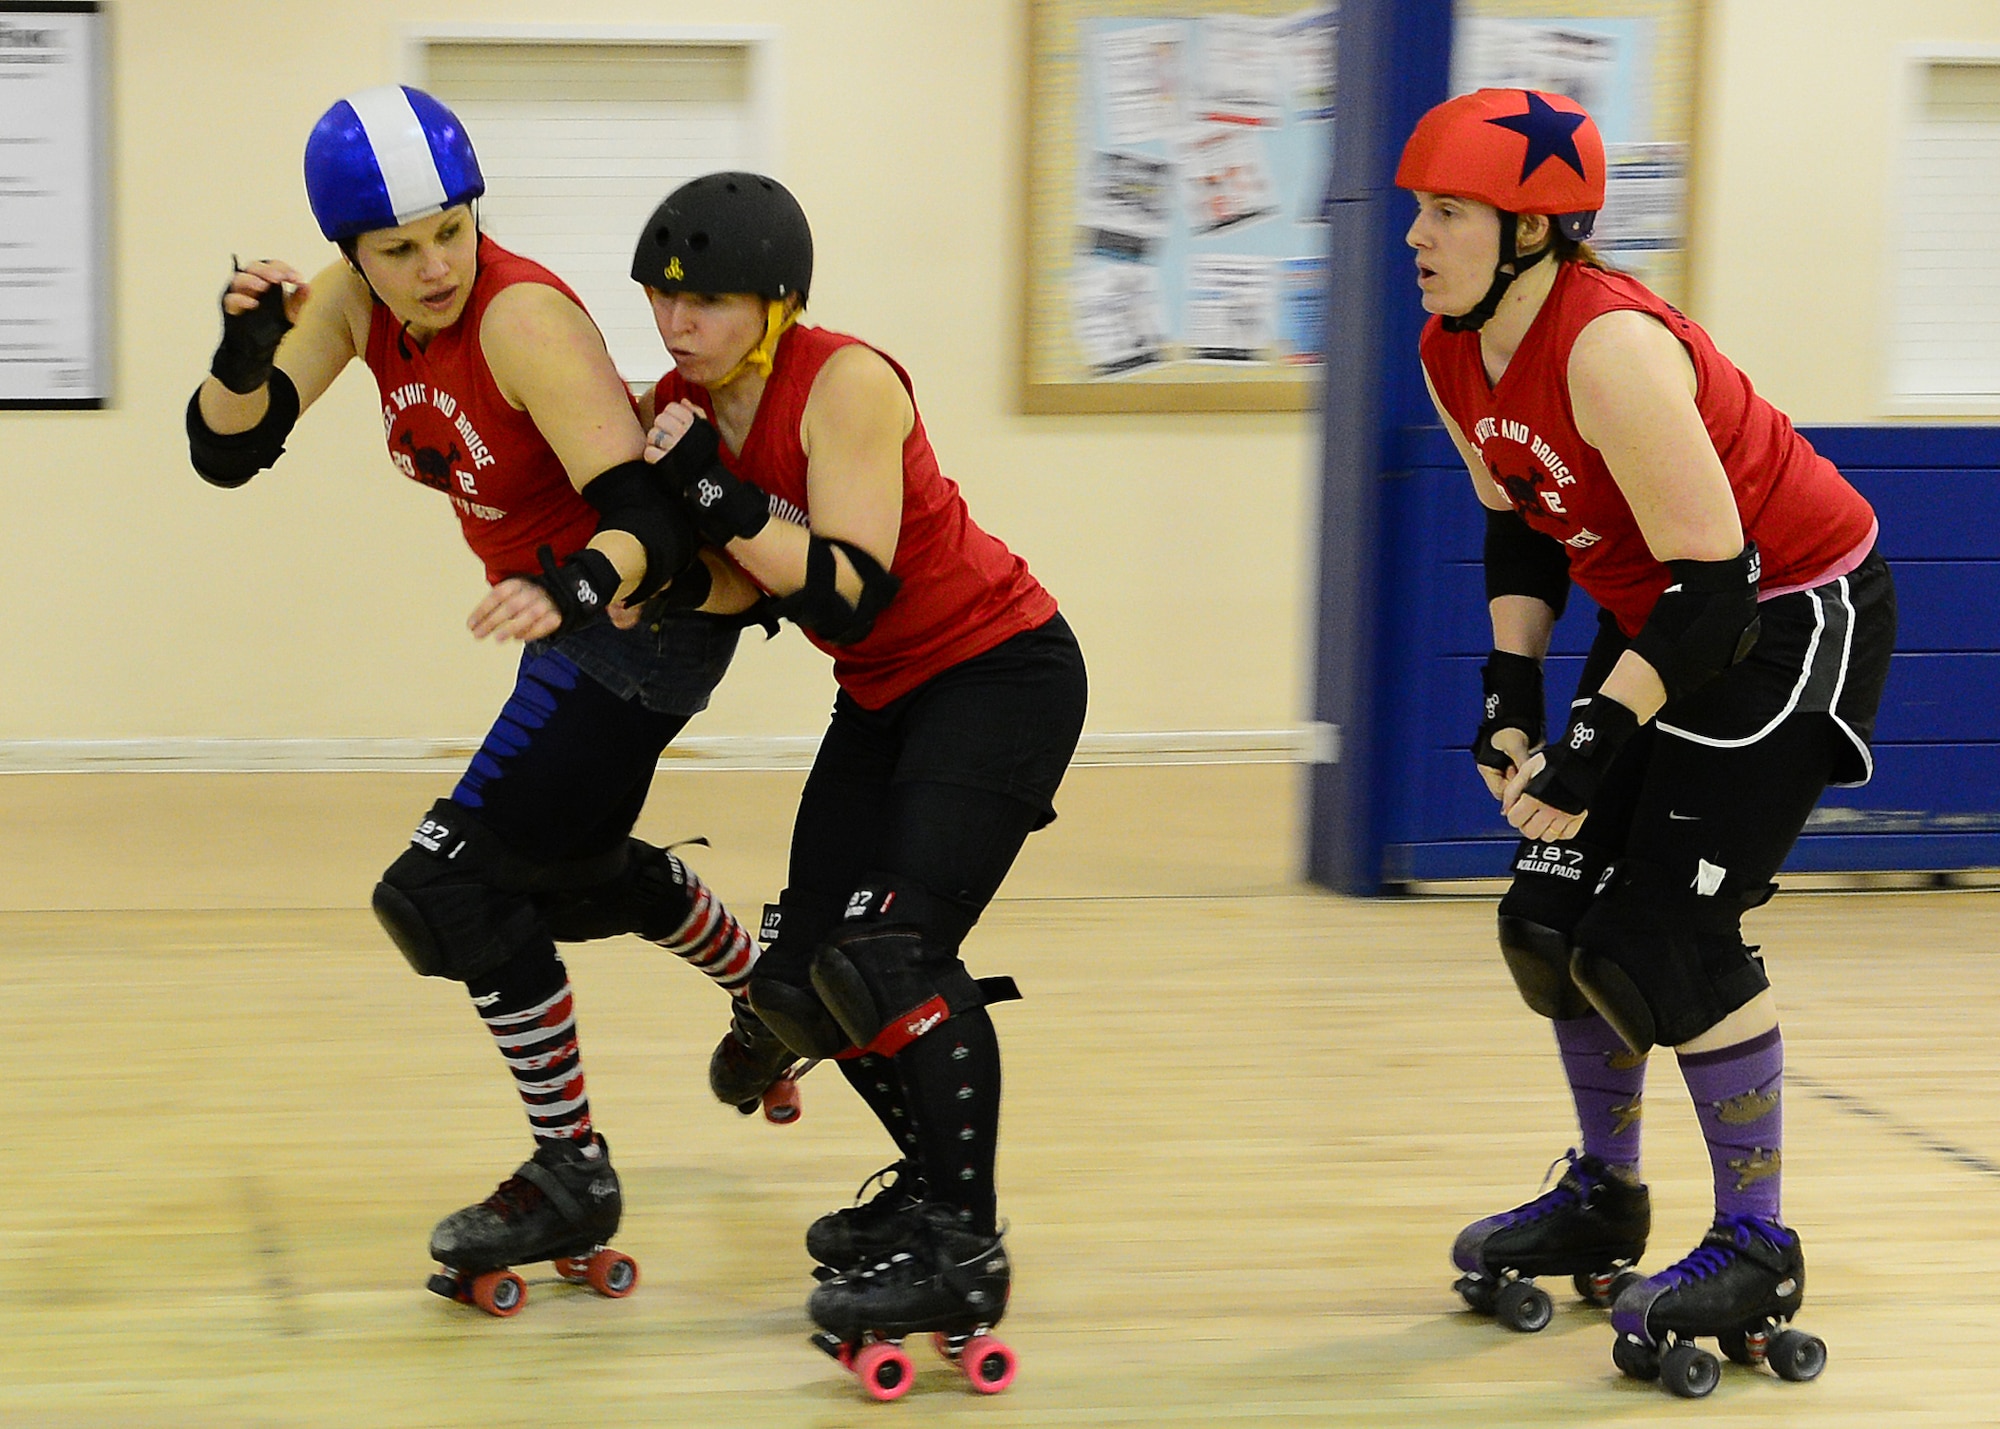 ROYAL AIR FORCE LAKENHEATH, England – Red, White and Bruises Rollers derby players Tarnna Hernandez (center), blocks Kay Daniels (left), from getting in front of Debby Rodriguez, the jammer, Feb. 21, 2013. RWBR is a private derby league at RAF Lakenheath and is open to women 18 years or older with a base access. (U.S. Air Force photo by Staff Sgt. Stephanie Mancha)